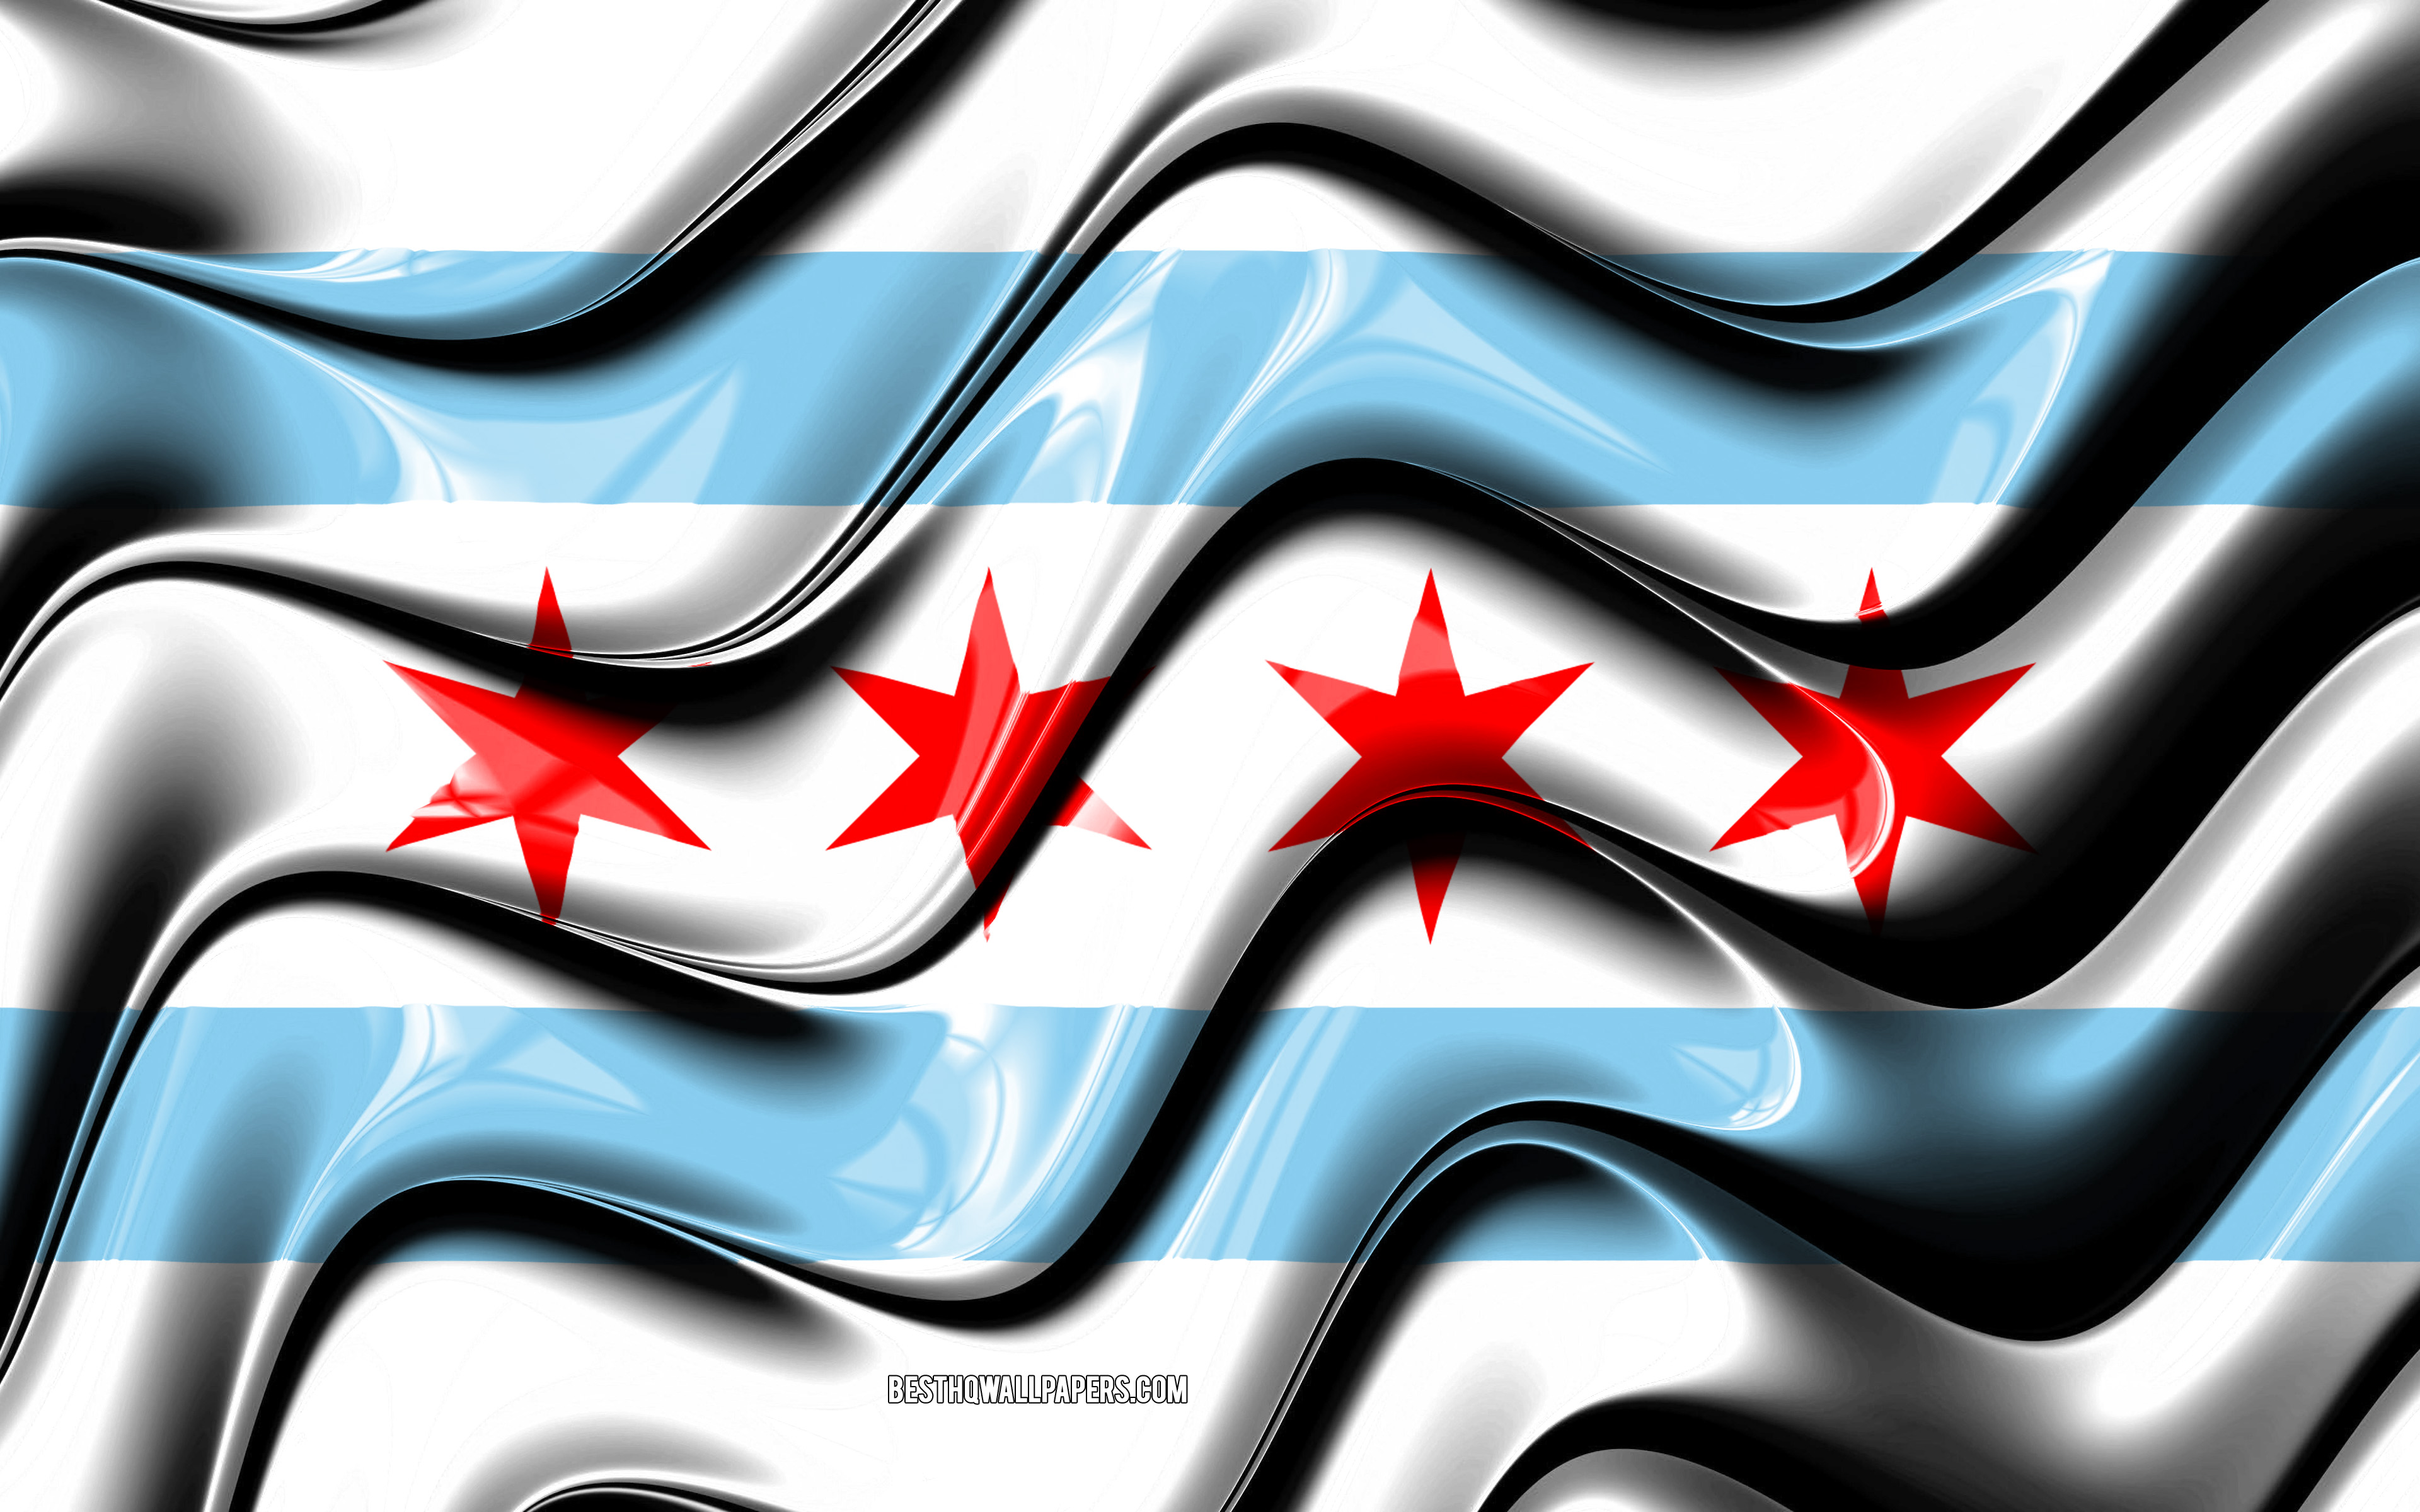 Download wallpaper Chicago flag, 4k, United States cities, Illinois, 3D art, Flag of Chicago, USA, City of Chicago, american cities, Chicago 3D flag, US cities, Chicago for desktop with resolution 3840x2400. High